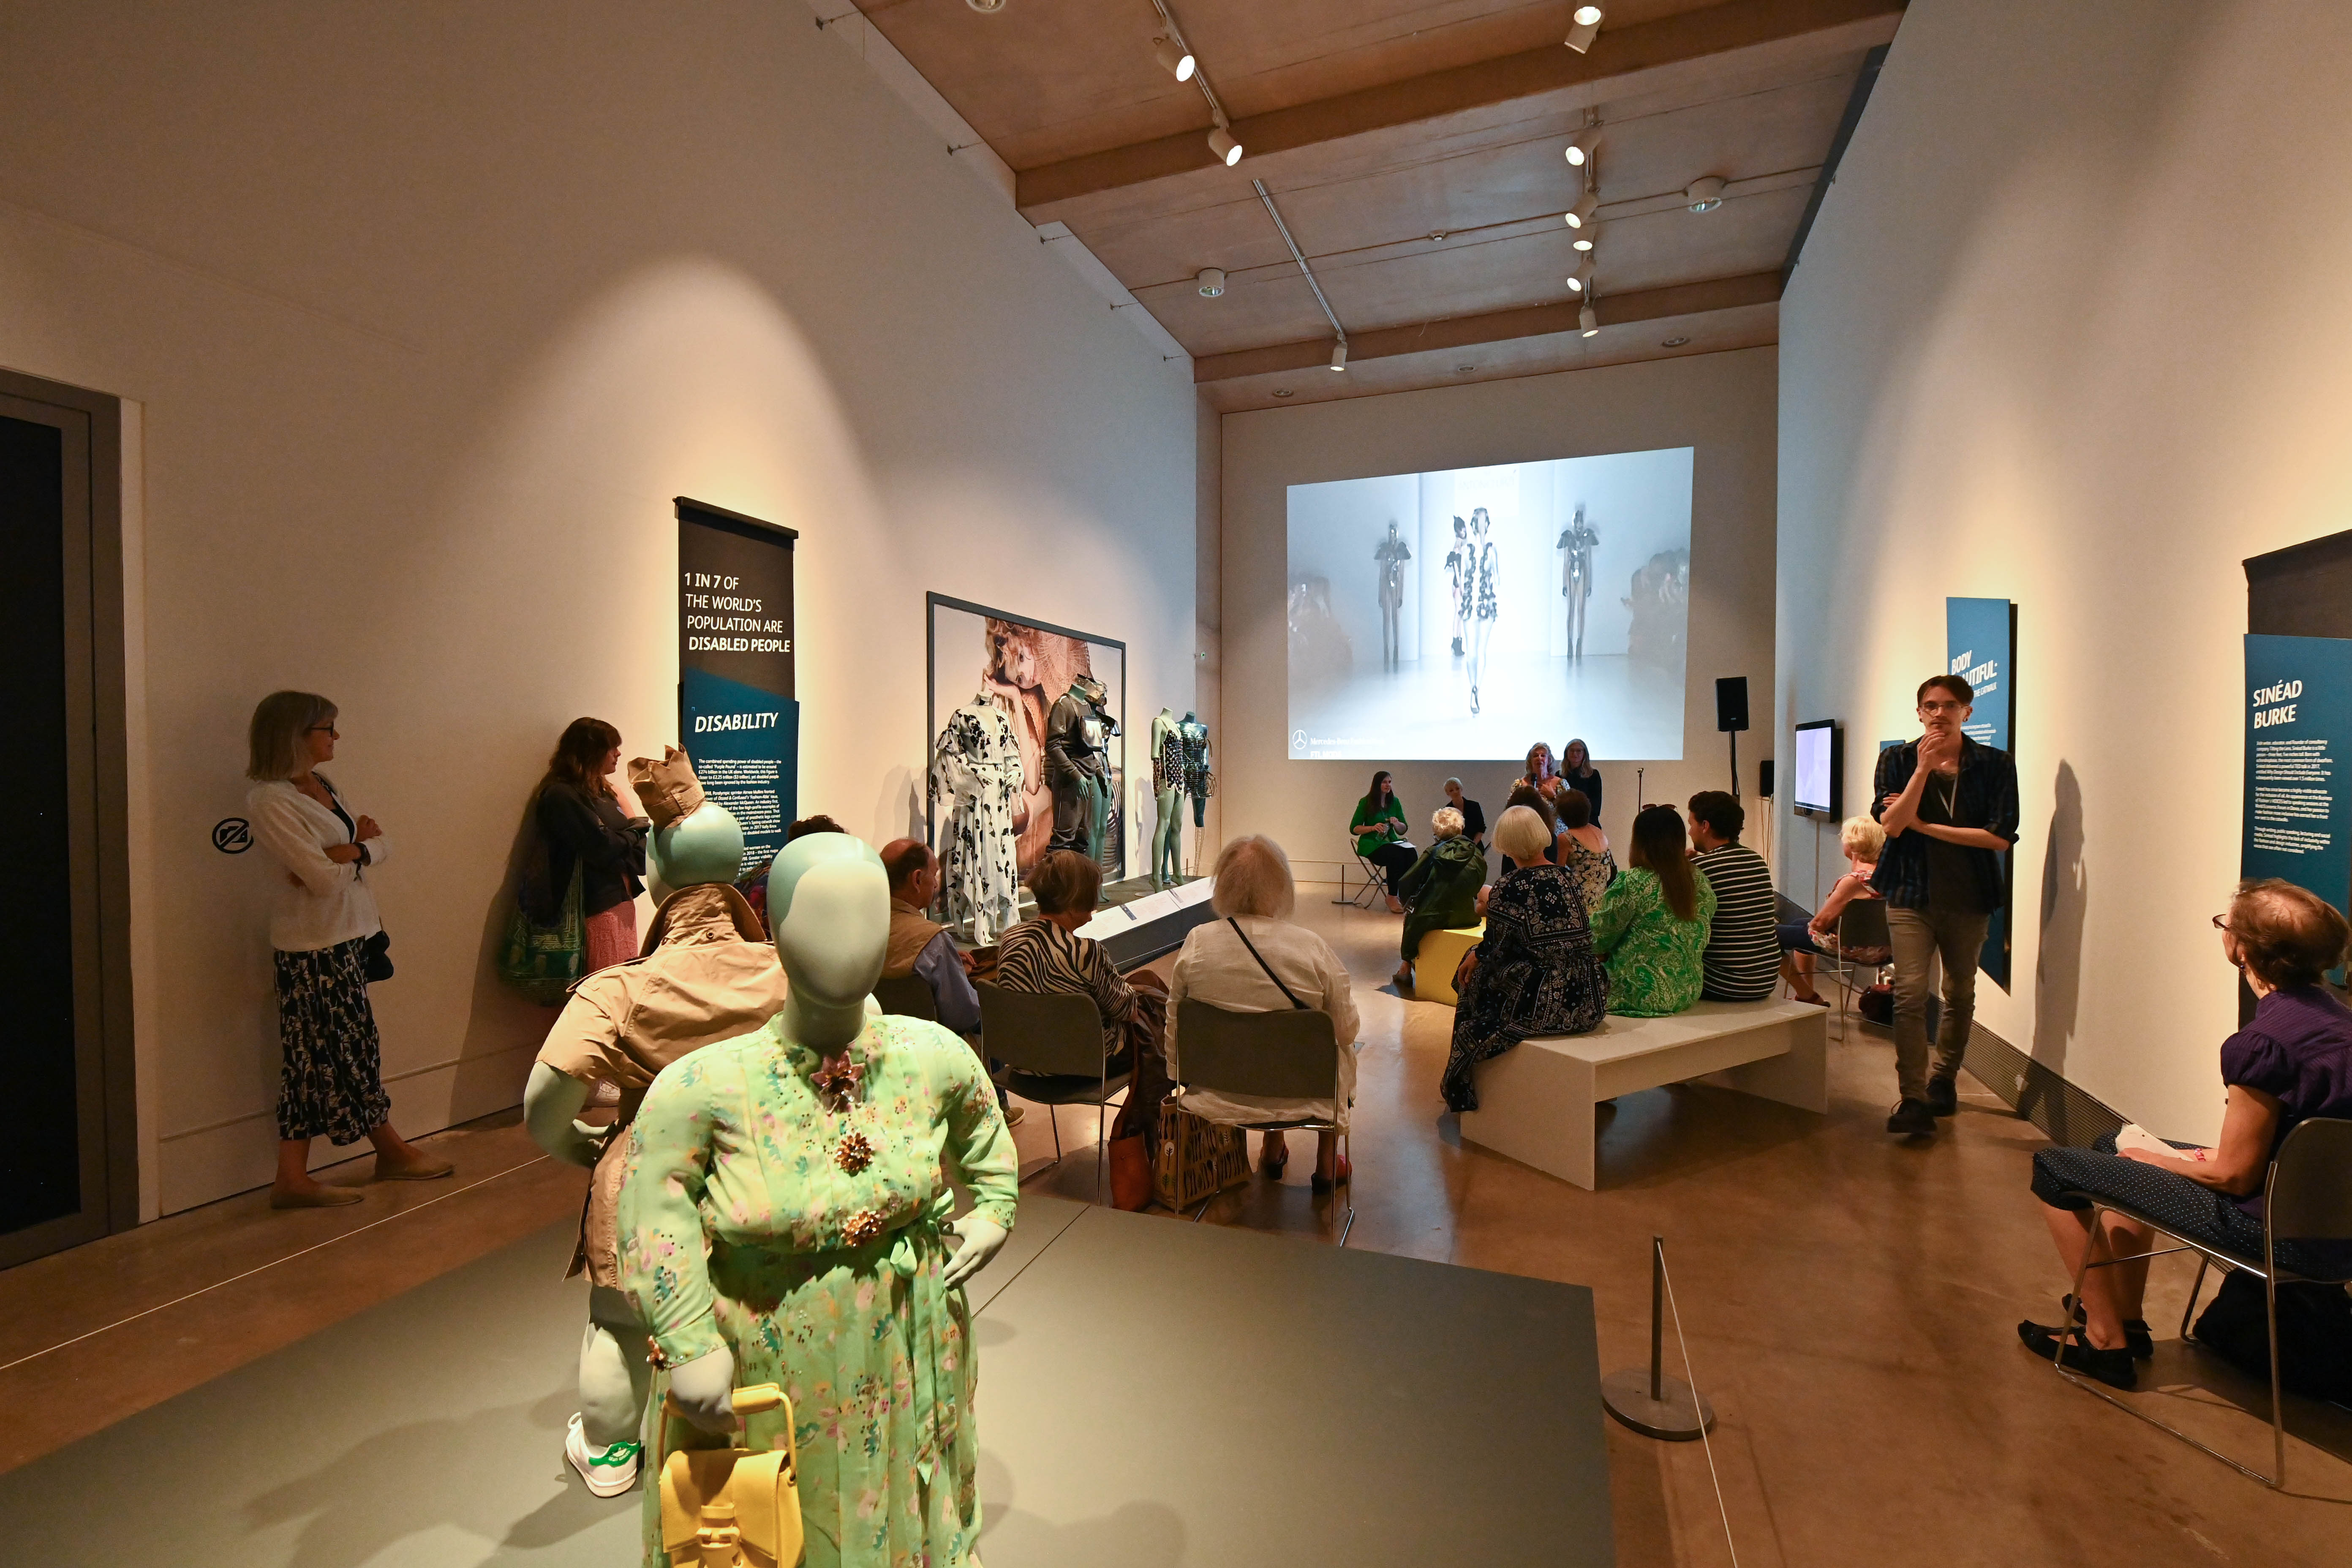 A group of people attend a talk within one of the gallery spaces during the exhibition.